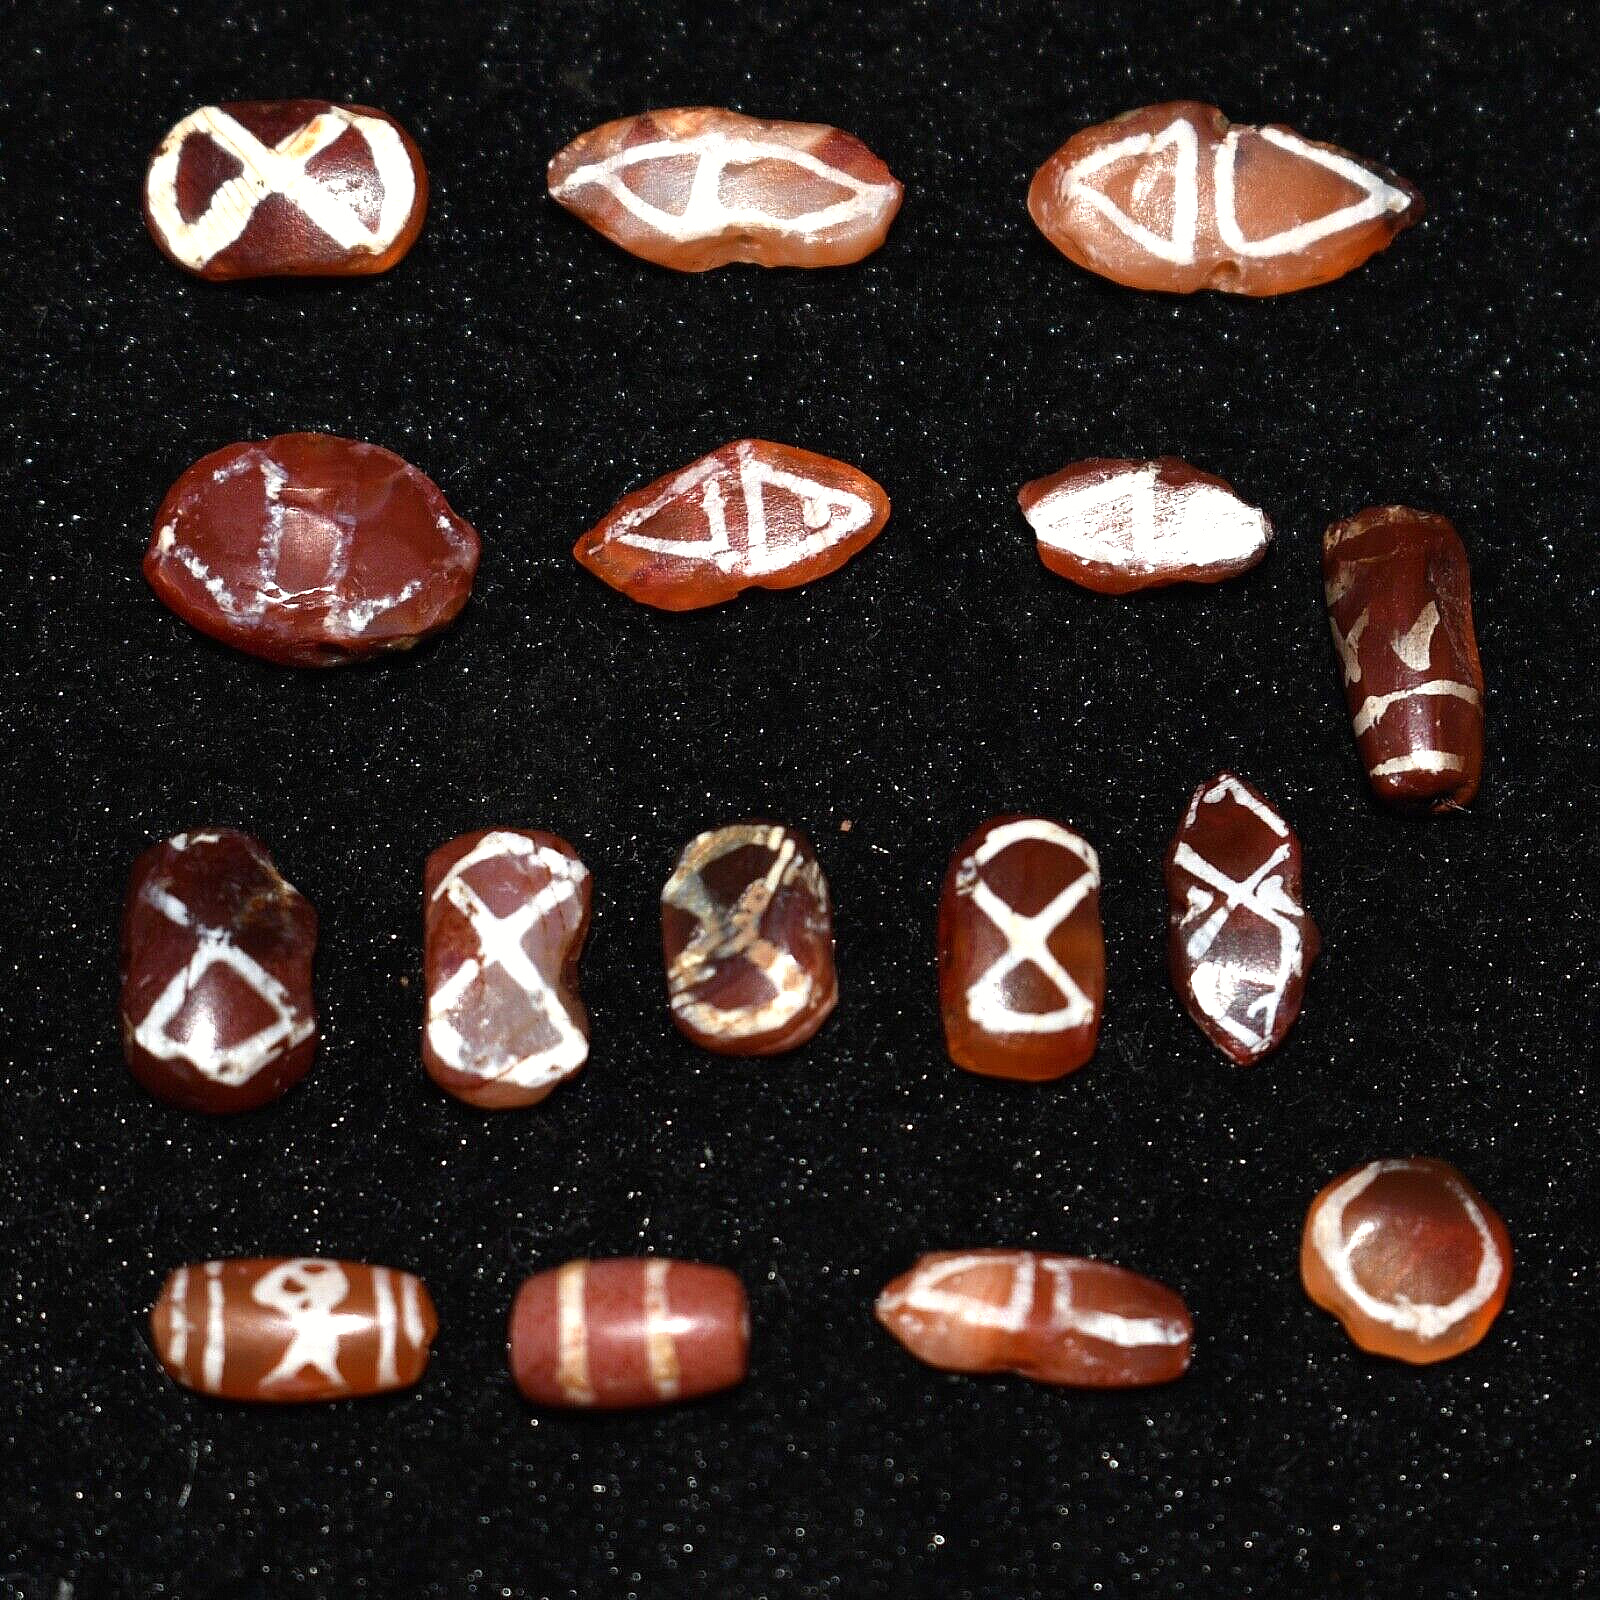 Lot Sale 16 Etched Carnelian Dzi Stone Beads with Stripes over 1500 years Old